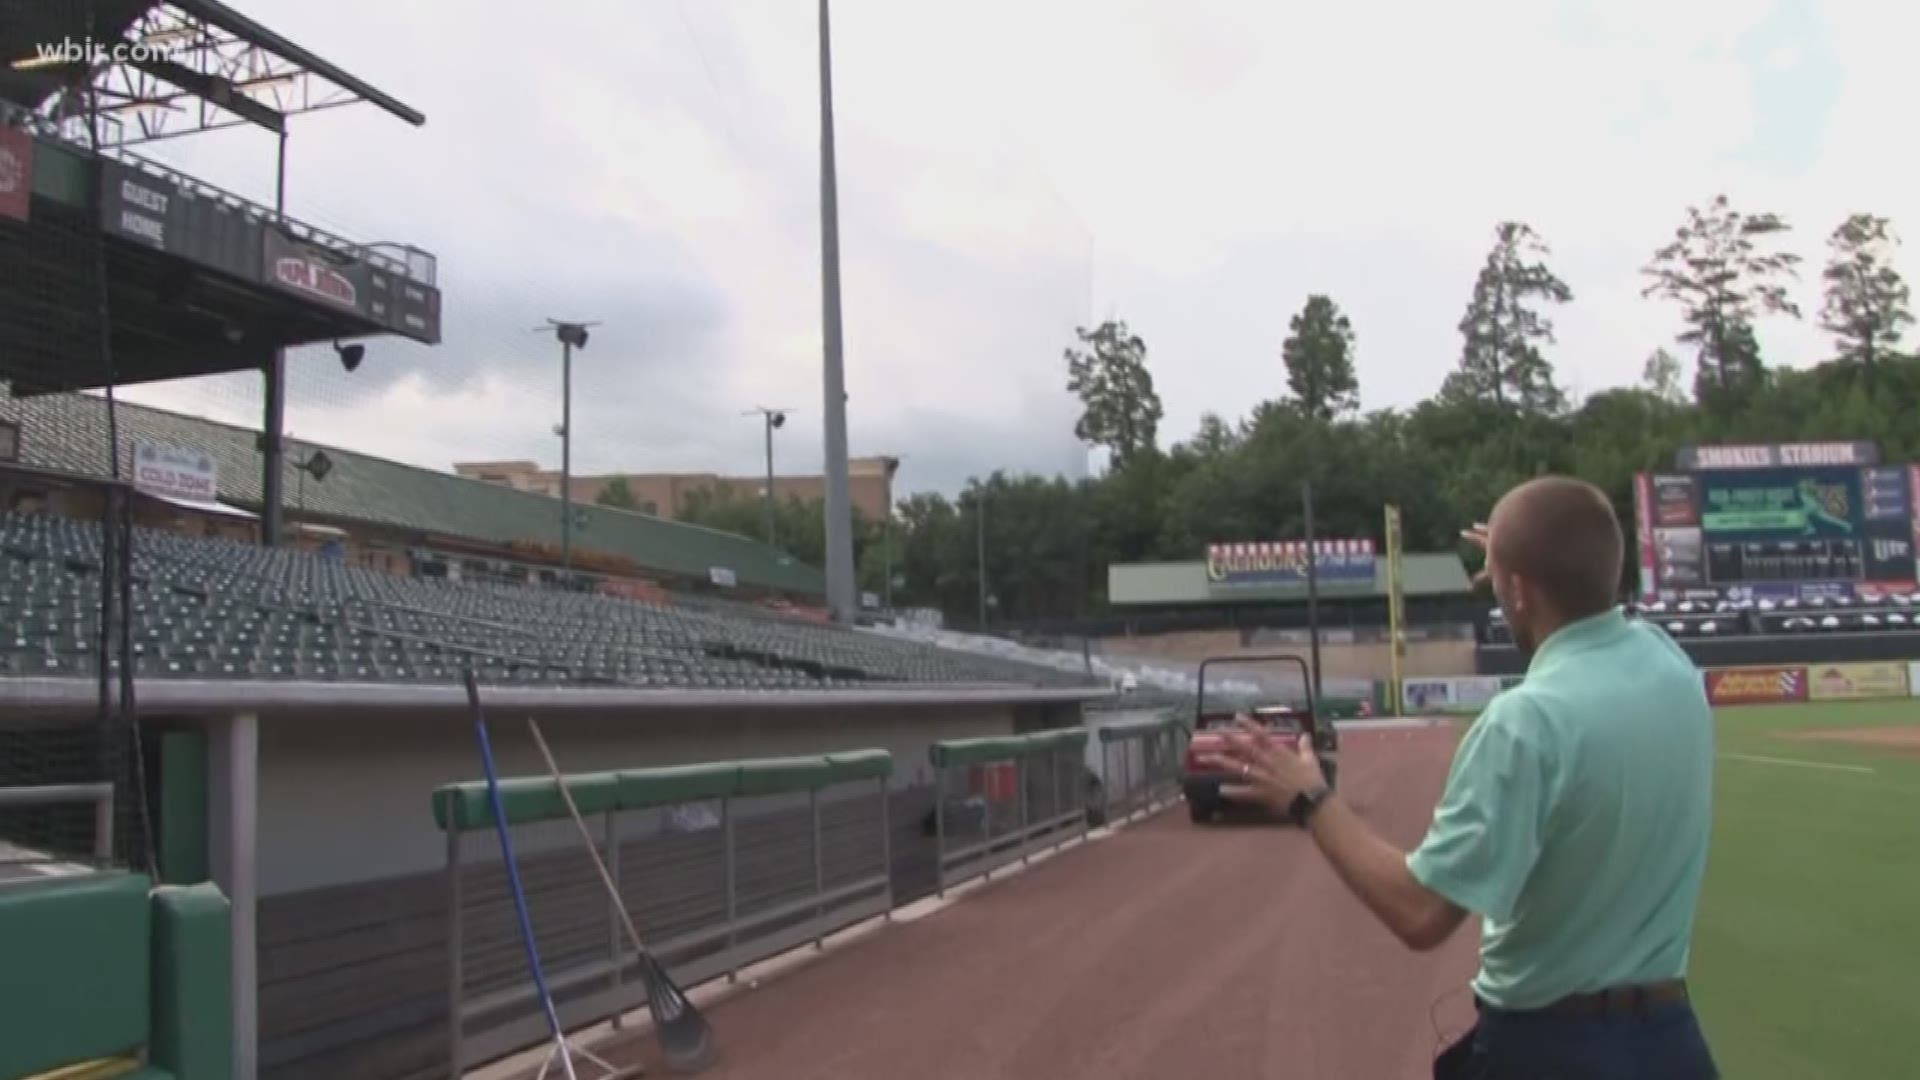 Smokies Stadium made changes to its safety netting about two years ago to help protect fans.